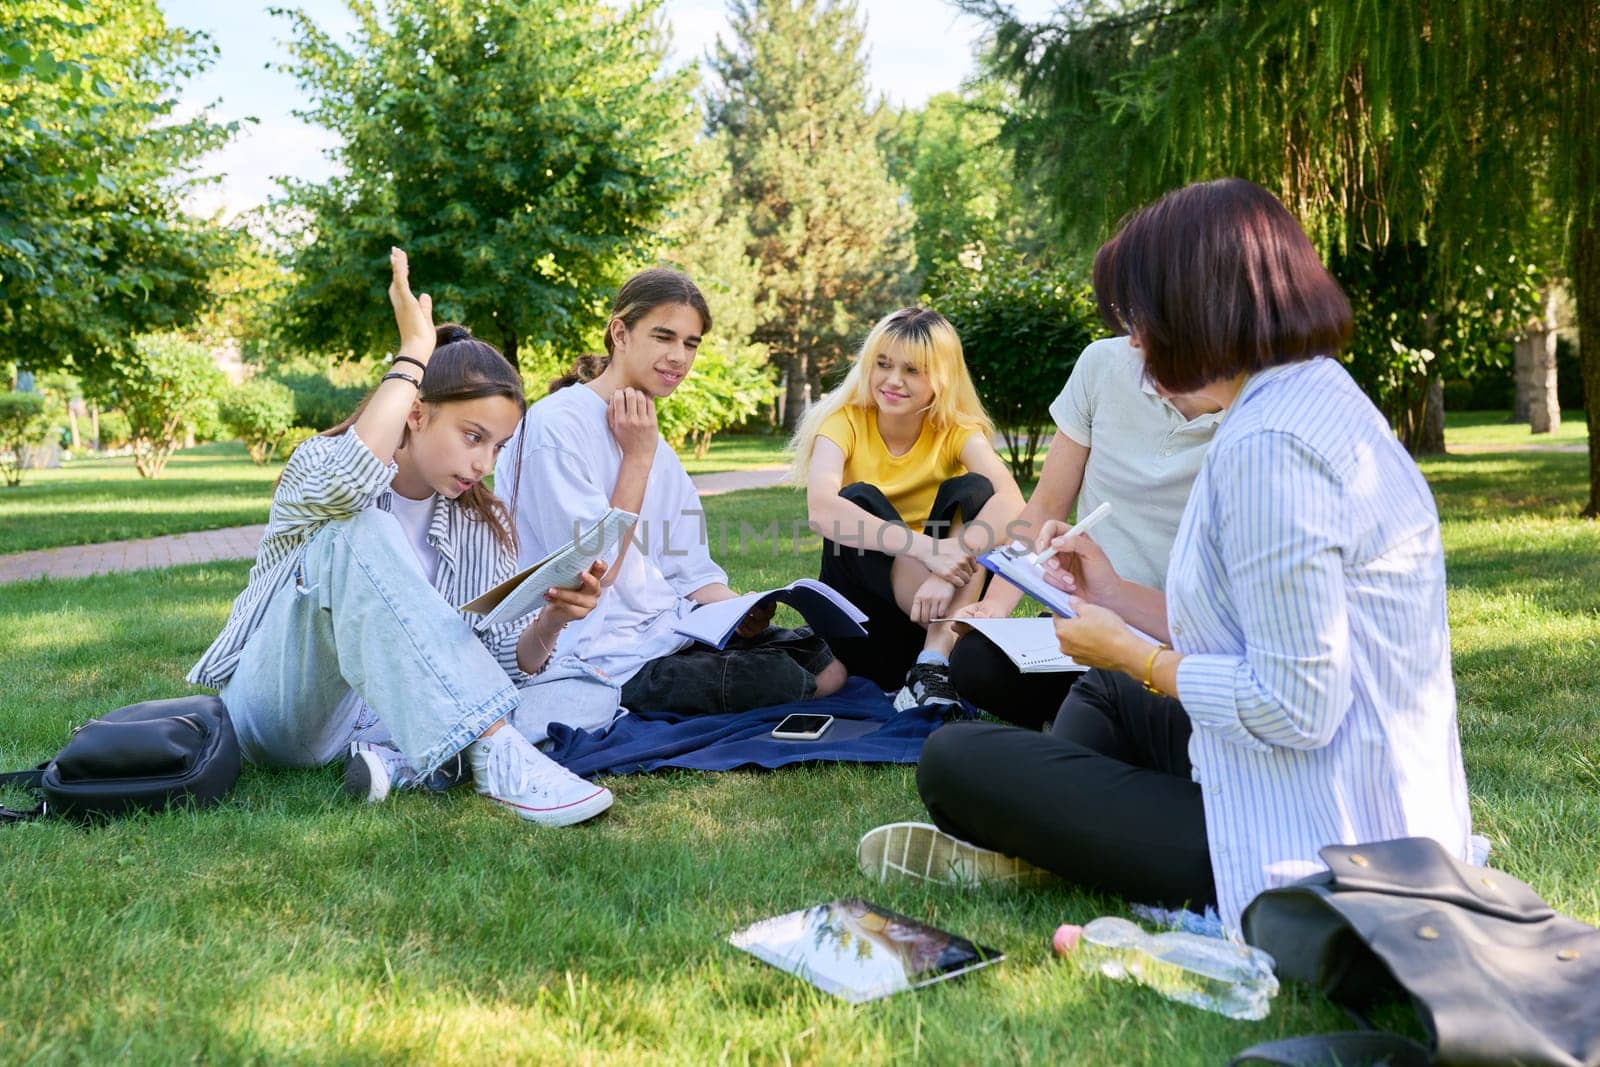 Outdoor, group of students with female teacher. Teenagers and mentor teacher talking sitting on grass in college park. Back to school, back to college, high school, education, teenagers concept